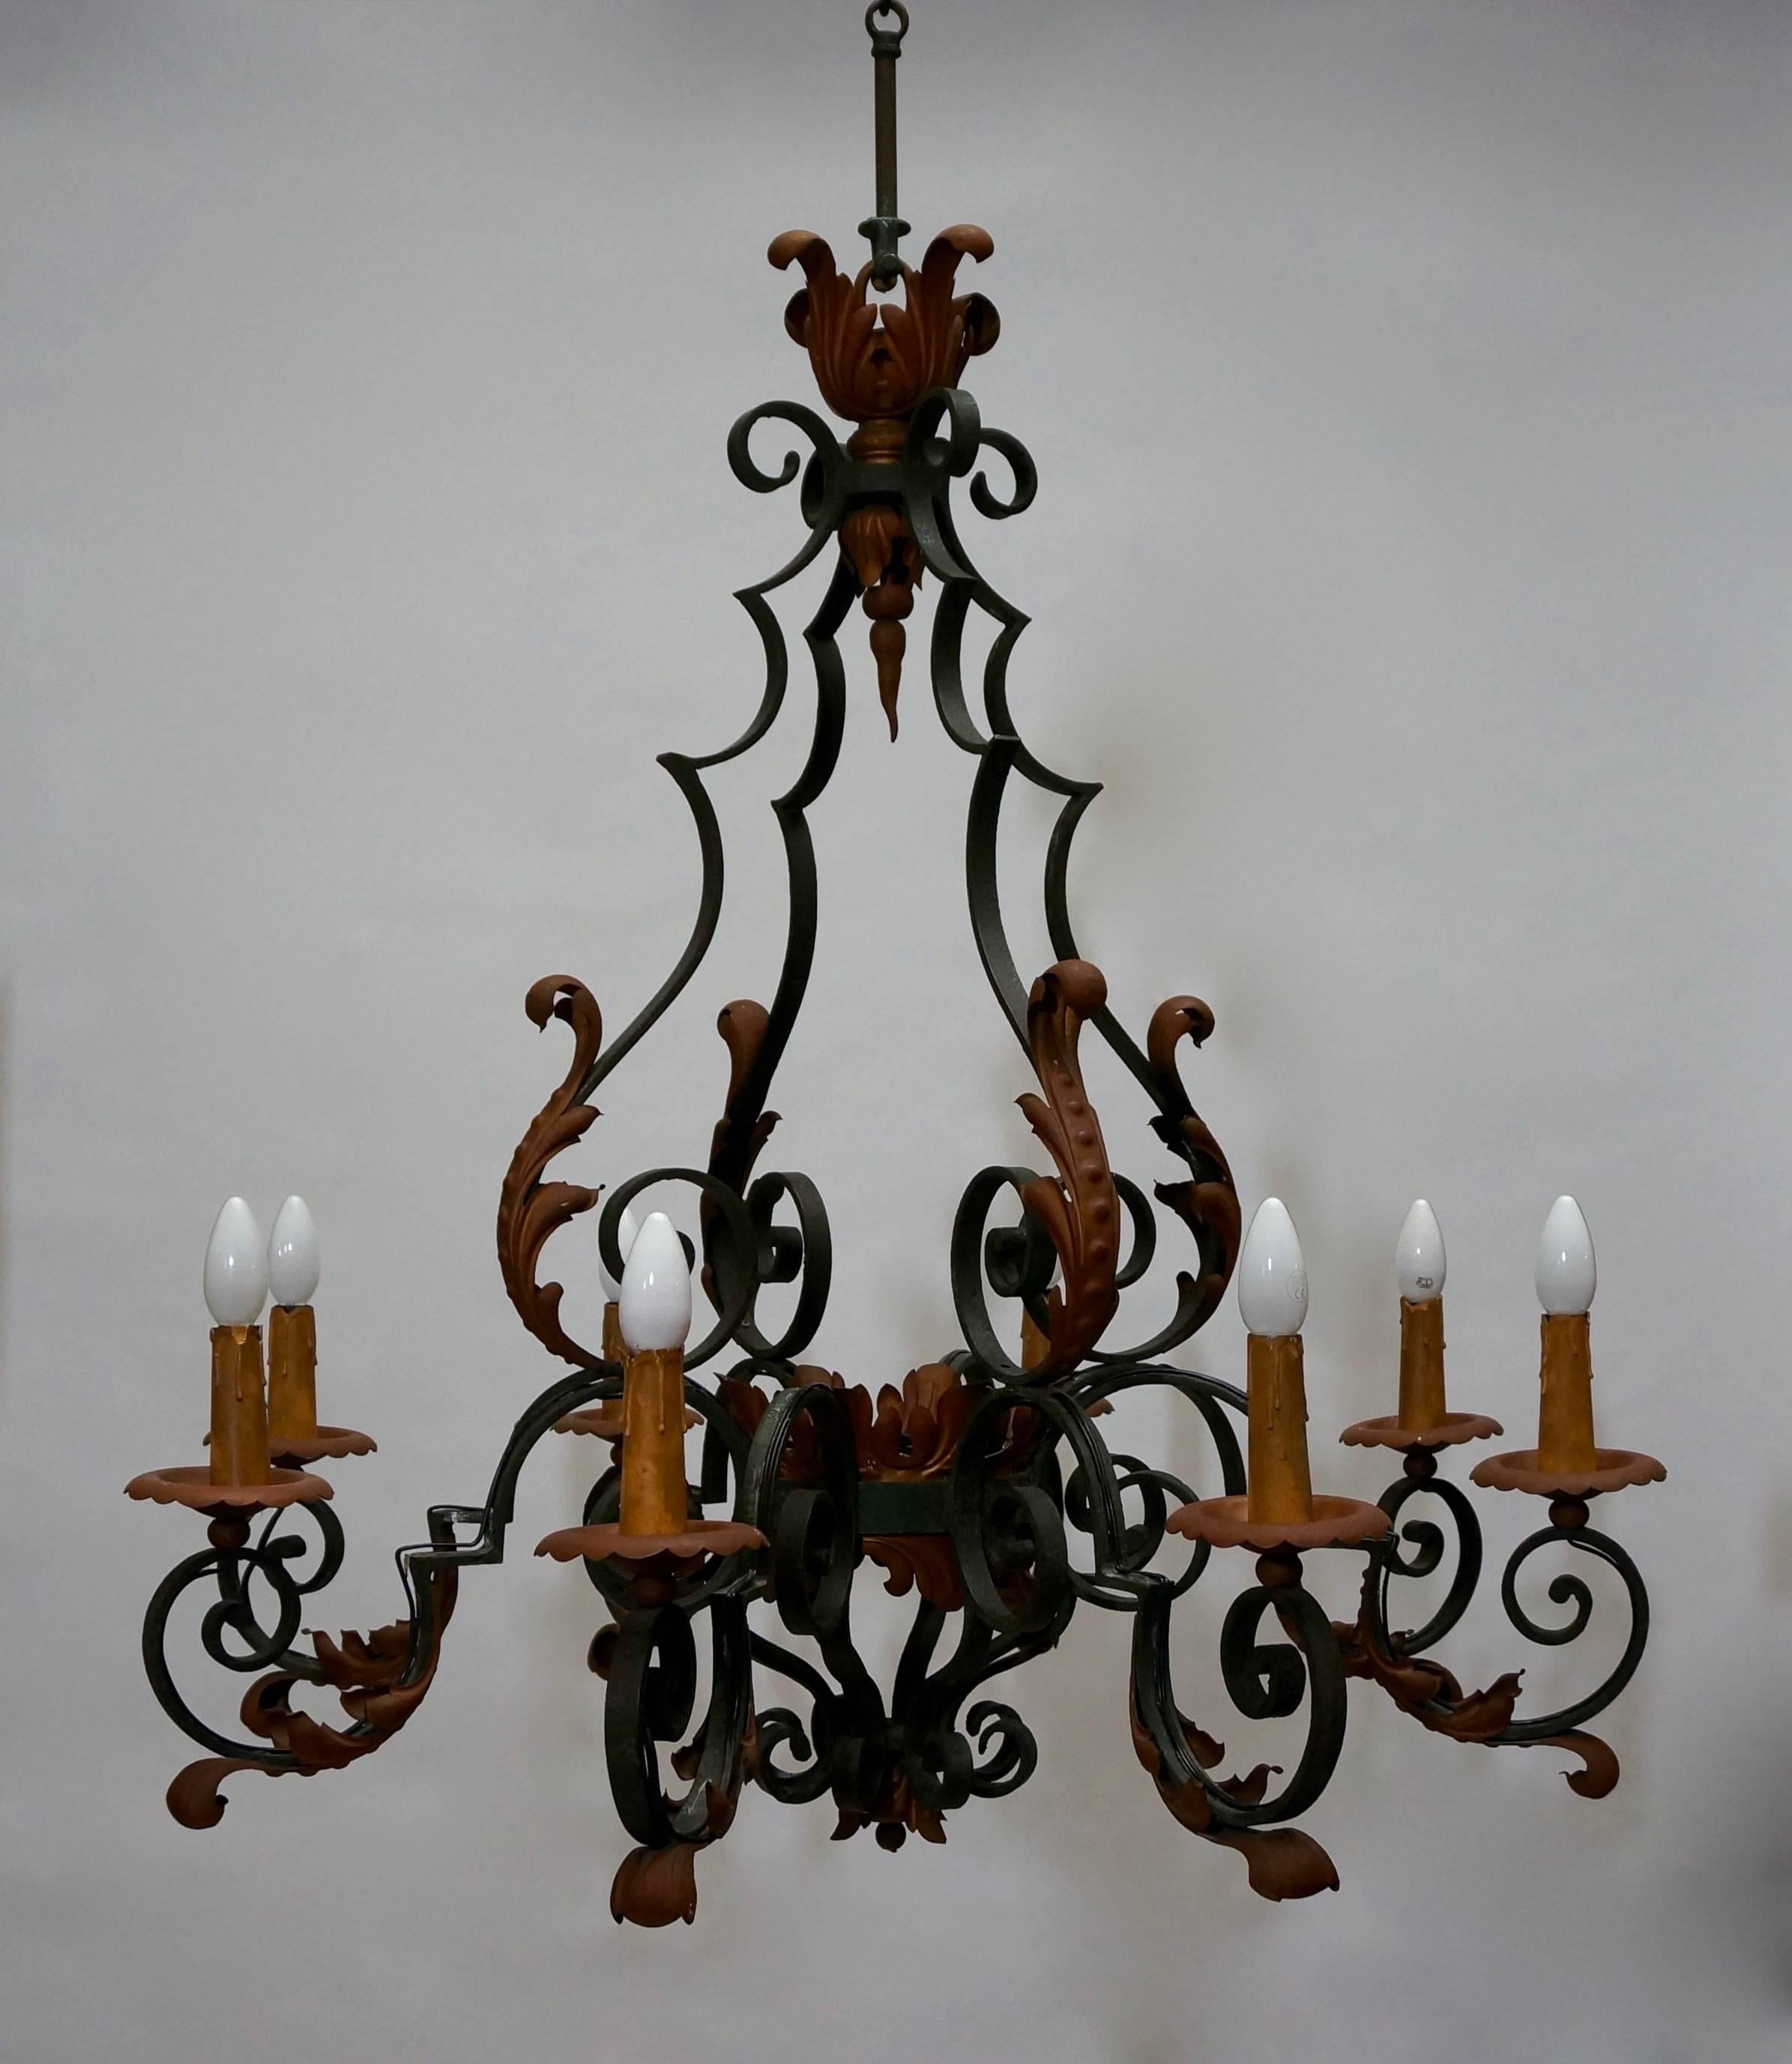 Handsome chandelier with handmade forged iron scrolled arms adorned by welded tole acanthus leaves. Painted in a green and copper color.